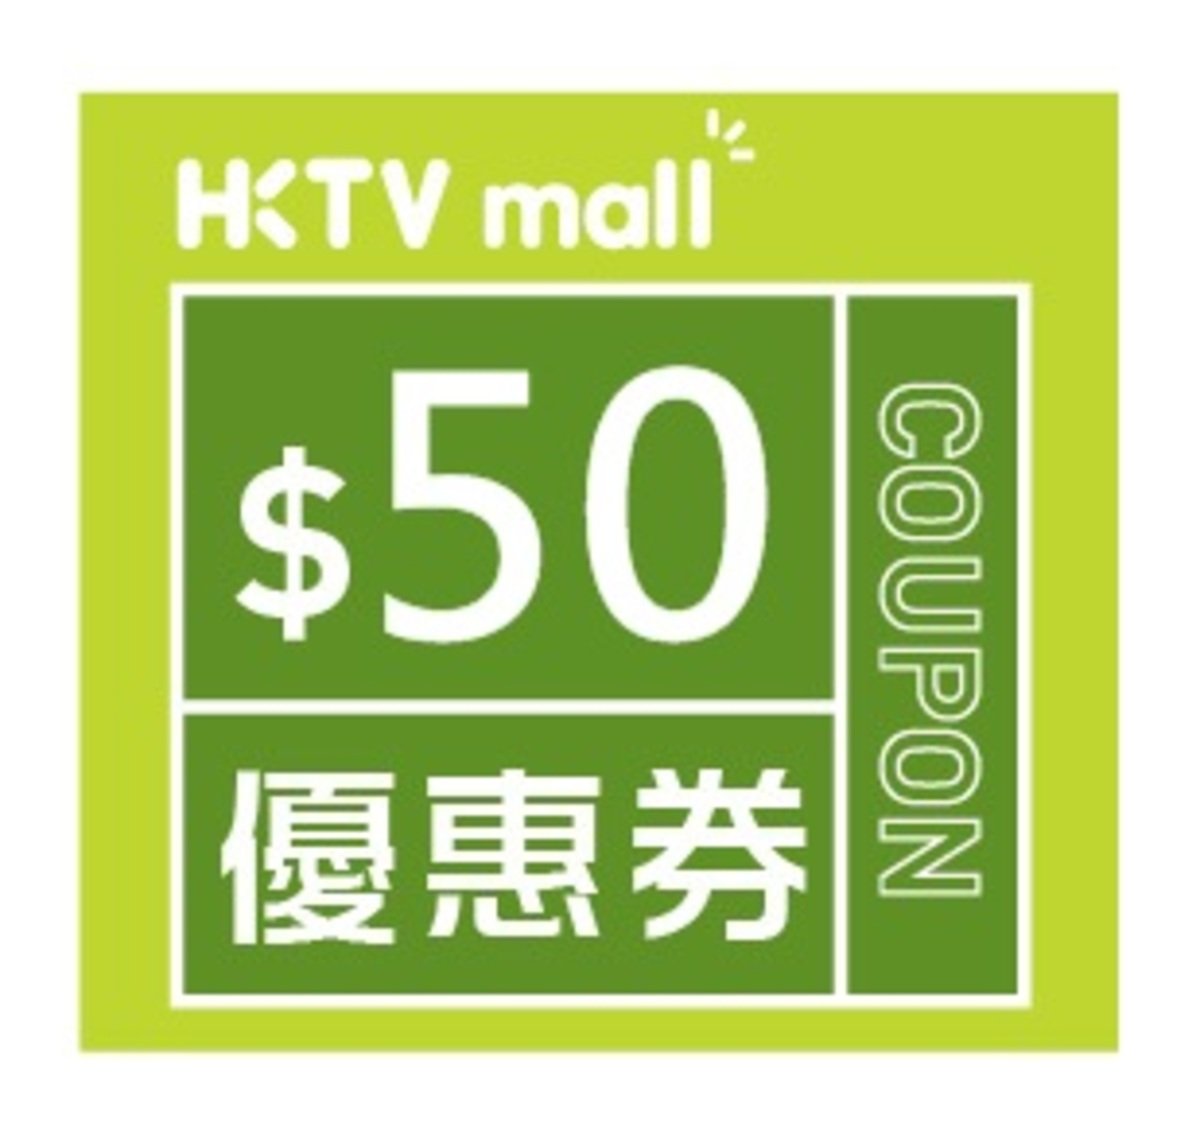 $50 HKTVmall coupon code (Expiry date: 2017.03.31)